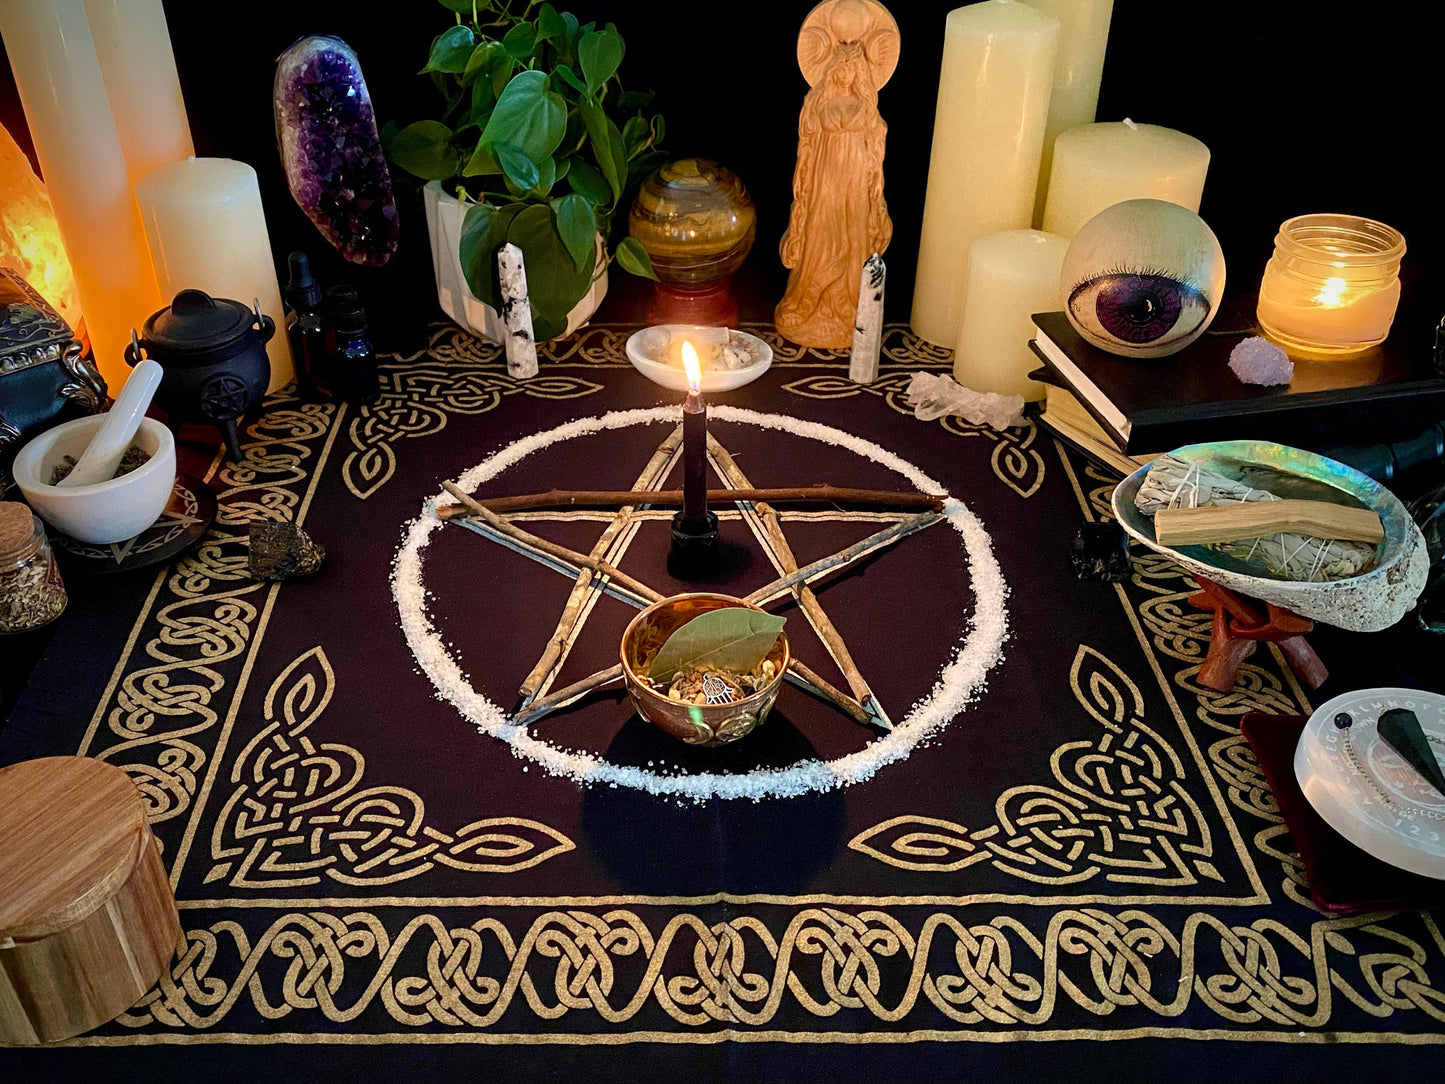 Banishment Spell - Get rid of unpleasant situations and people from your life